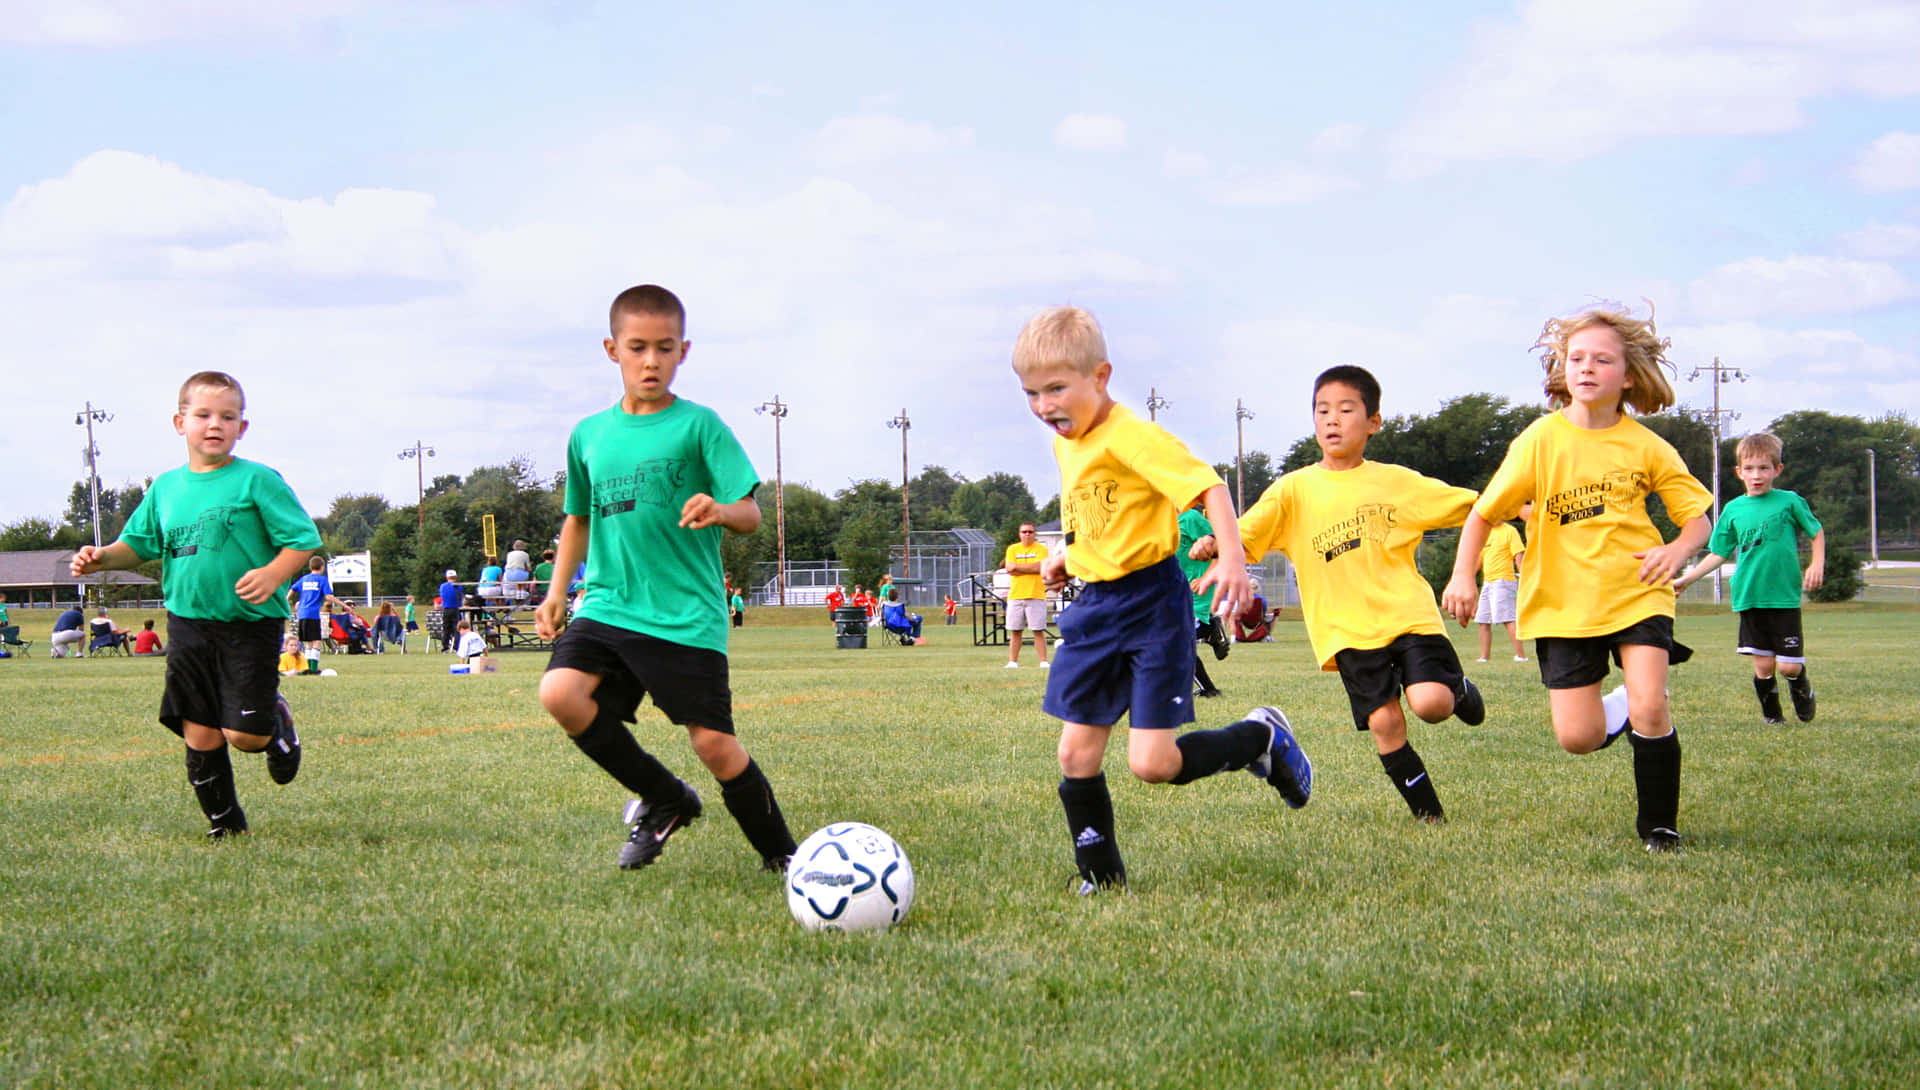 Youth Soccer Matchin Action Wallpaper